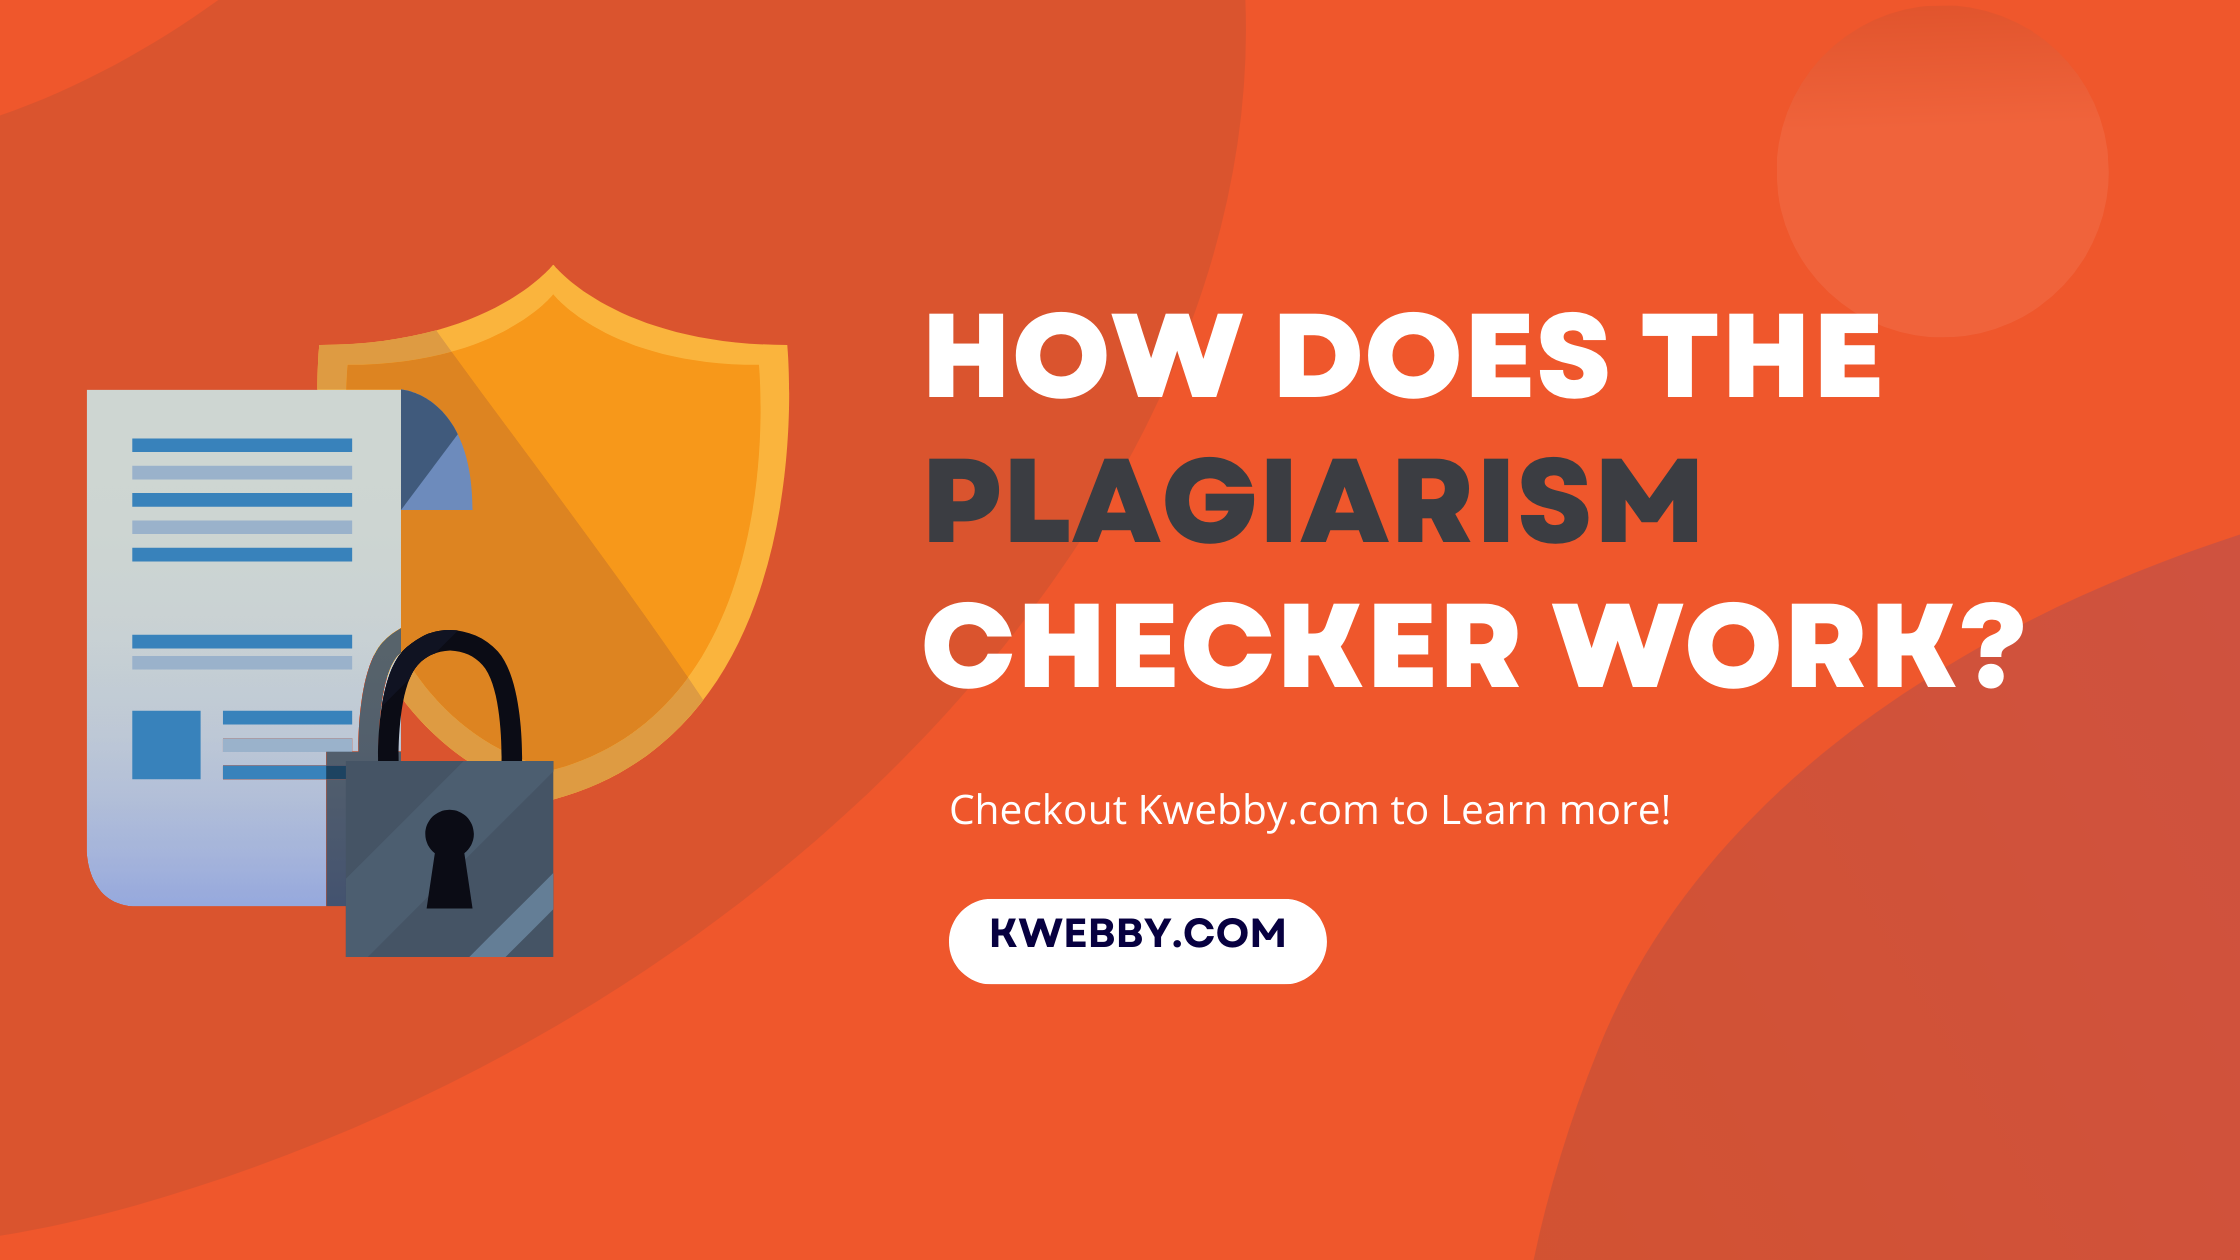 How Does the Plagiarism Checker Work?